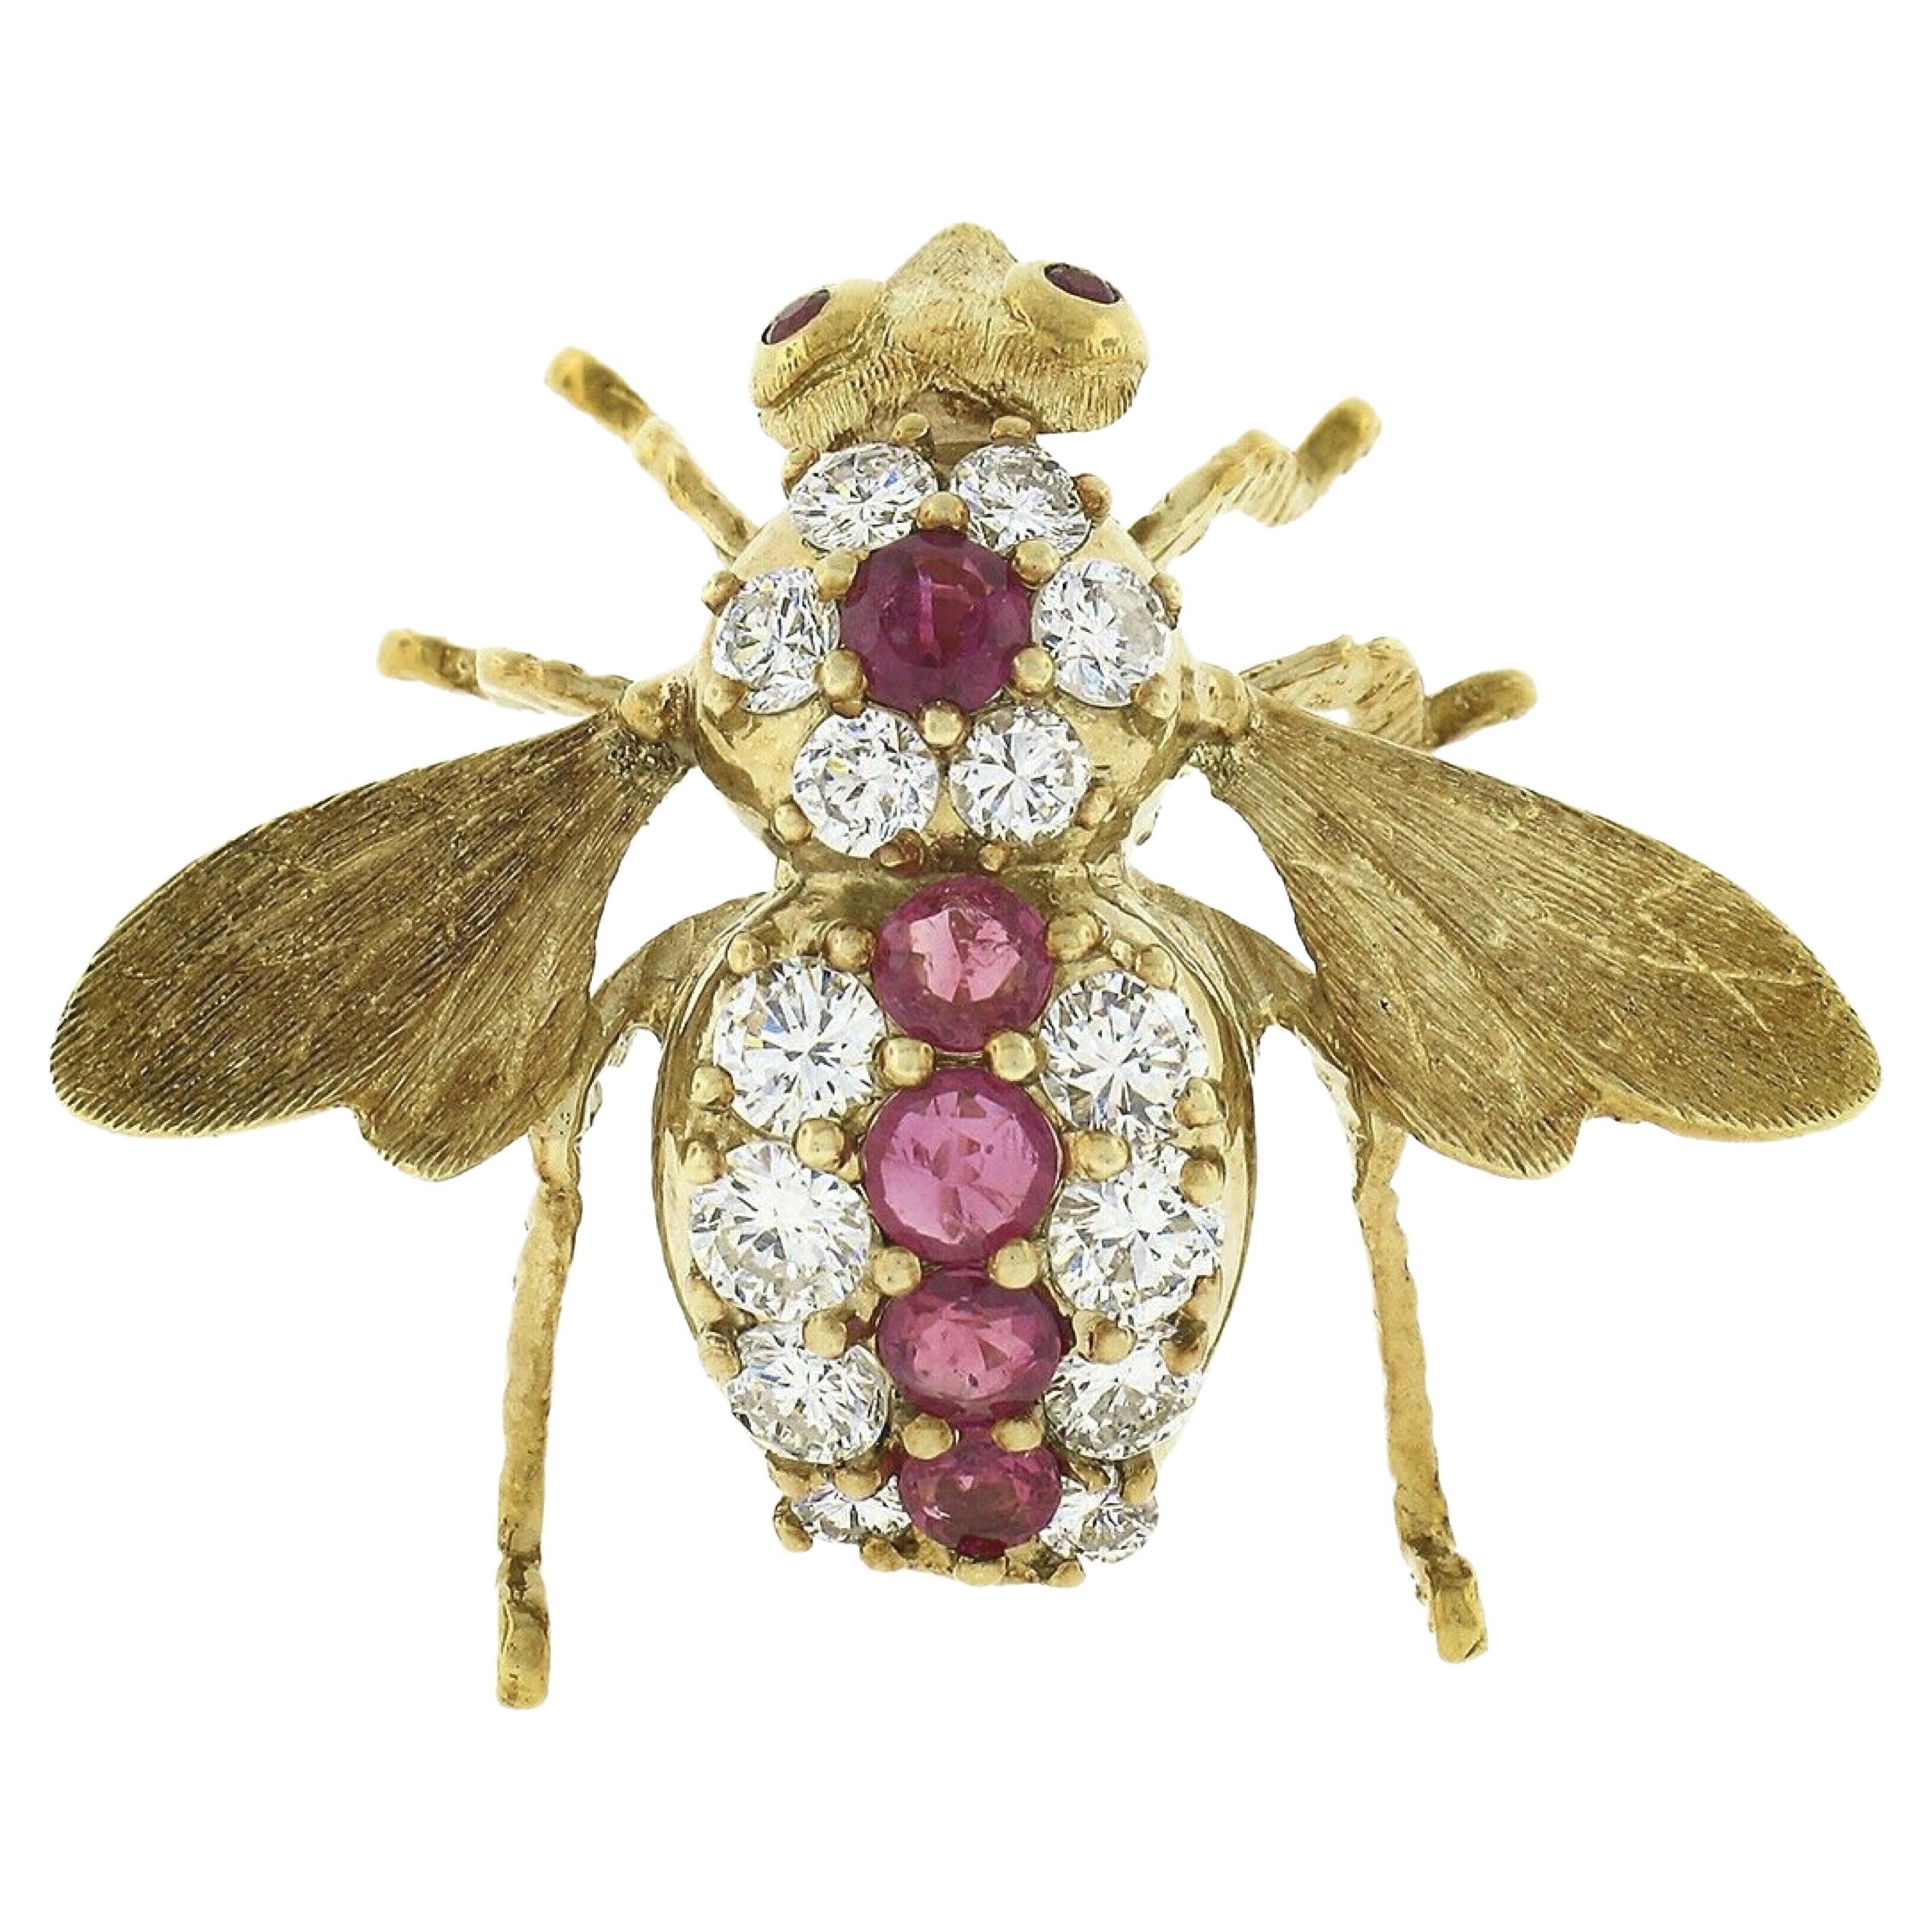 Vintage Herbert Rosenthal 18K Gold 2.35ct Ruby Diamond Fly Bee Insect Pin Brooch